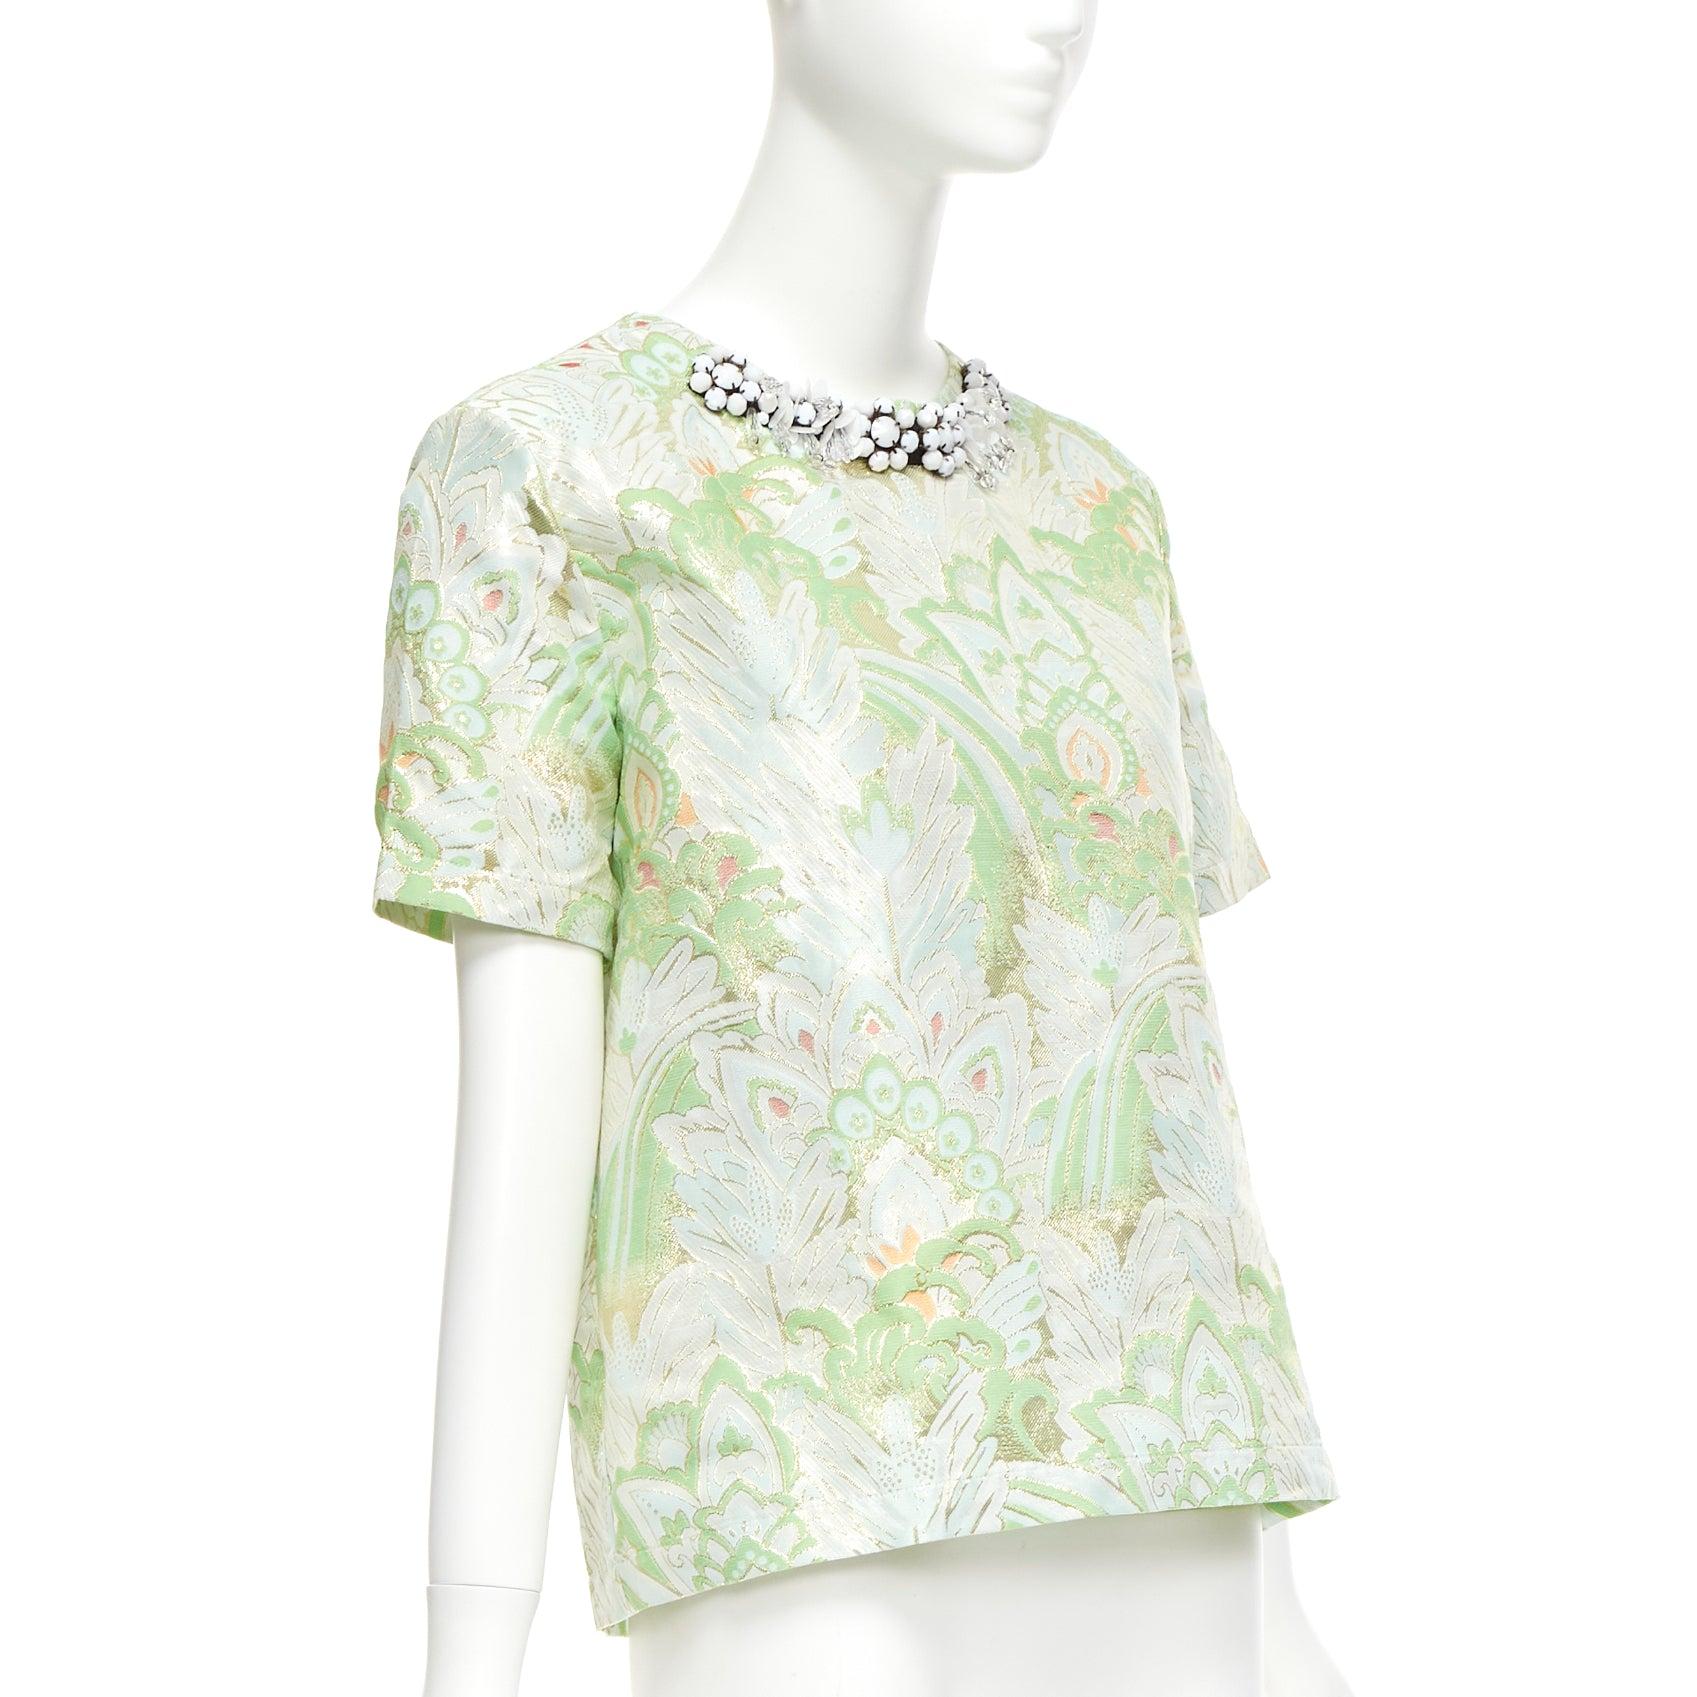 MARNI 2012 green paisley jacquard bead embellished collar boxy top IT38 XS
Reference: CELG/A00324
Brand: Marni
Collection: FW 2012
Material: Polyester, Blend
Color: Green, Multicolour
Pattern: Paisley
Closure: Zip
Extra Details: Back zip.